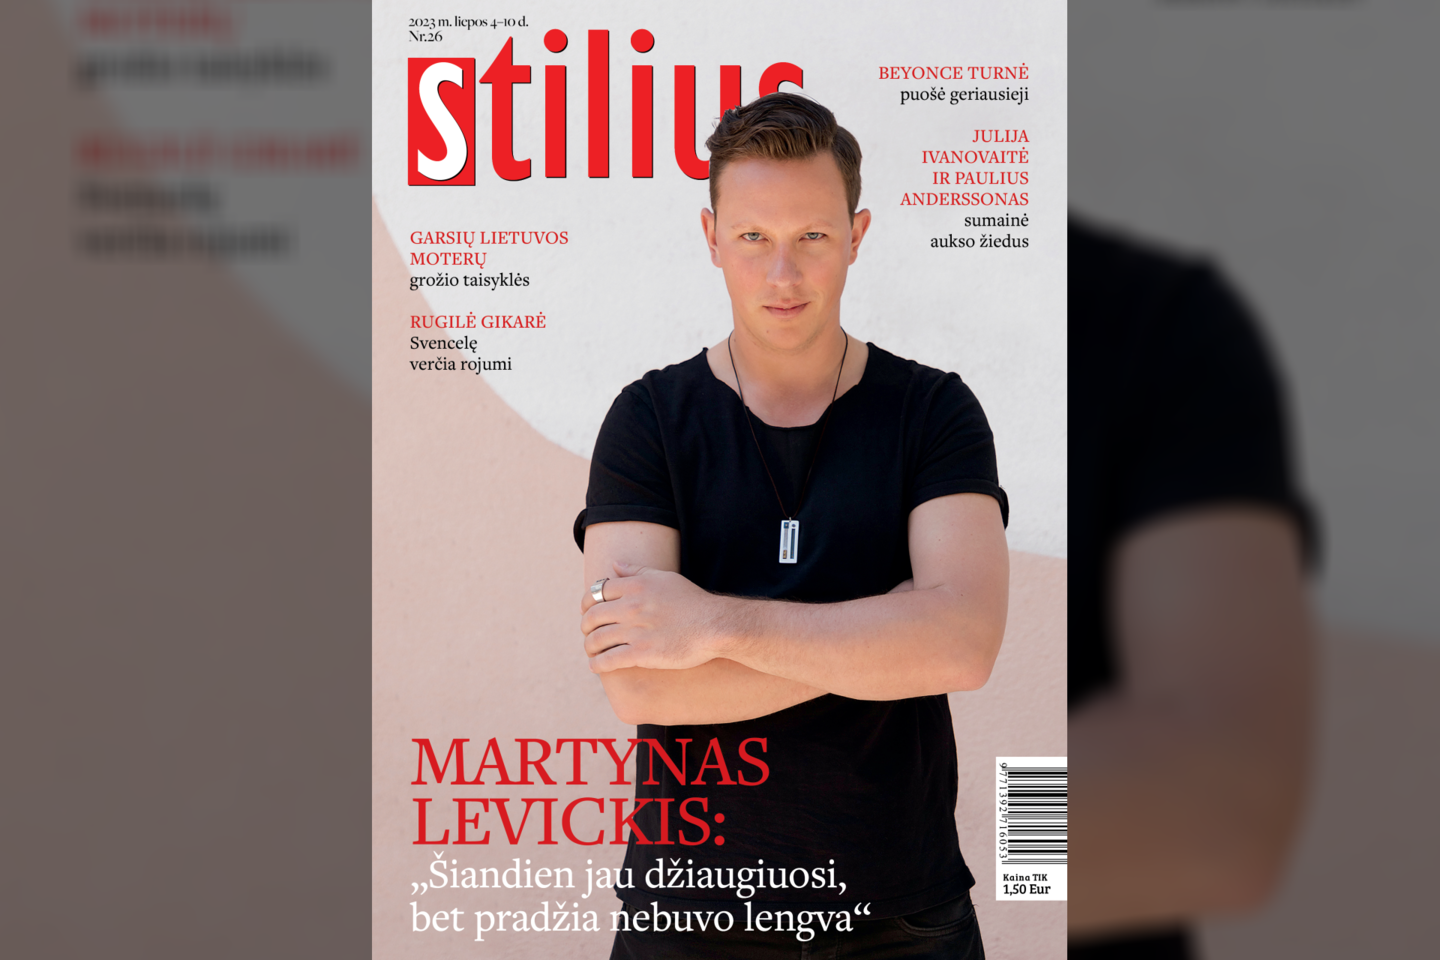  Martynas Levickis.